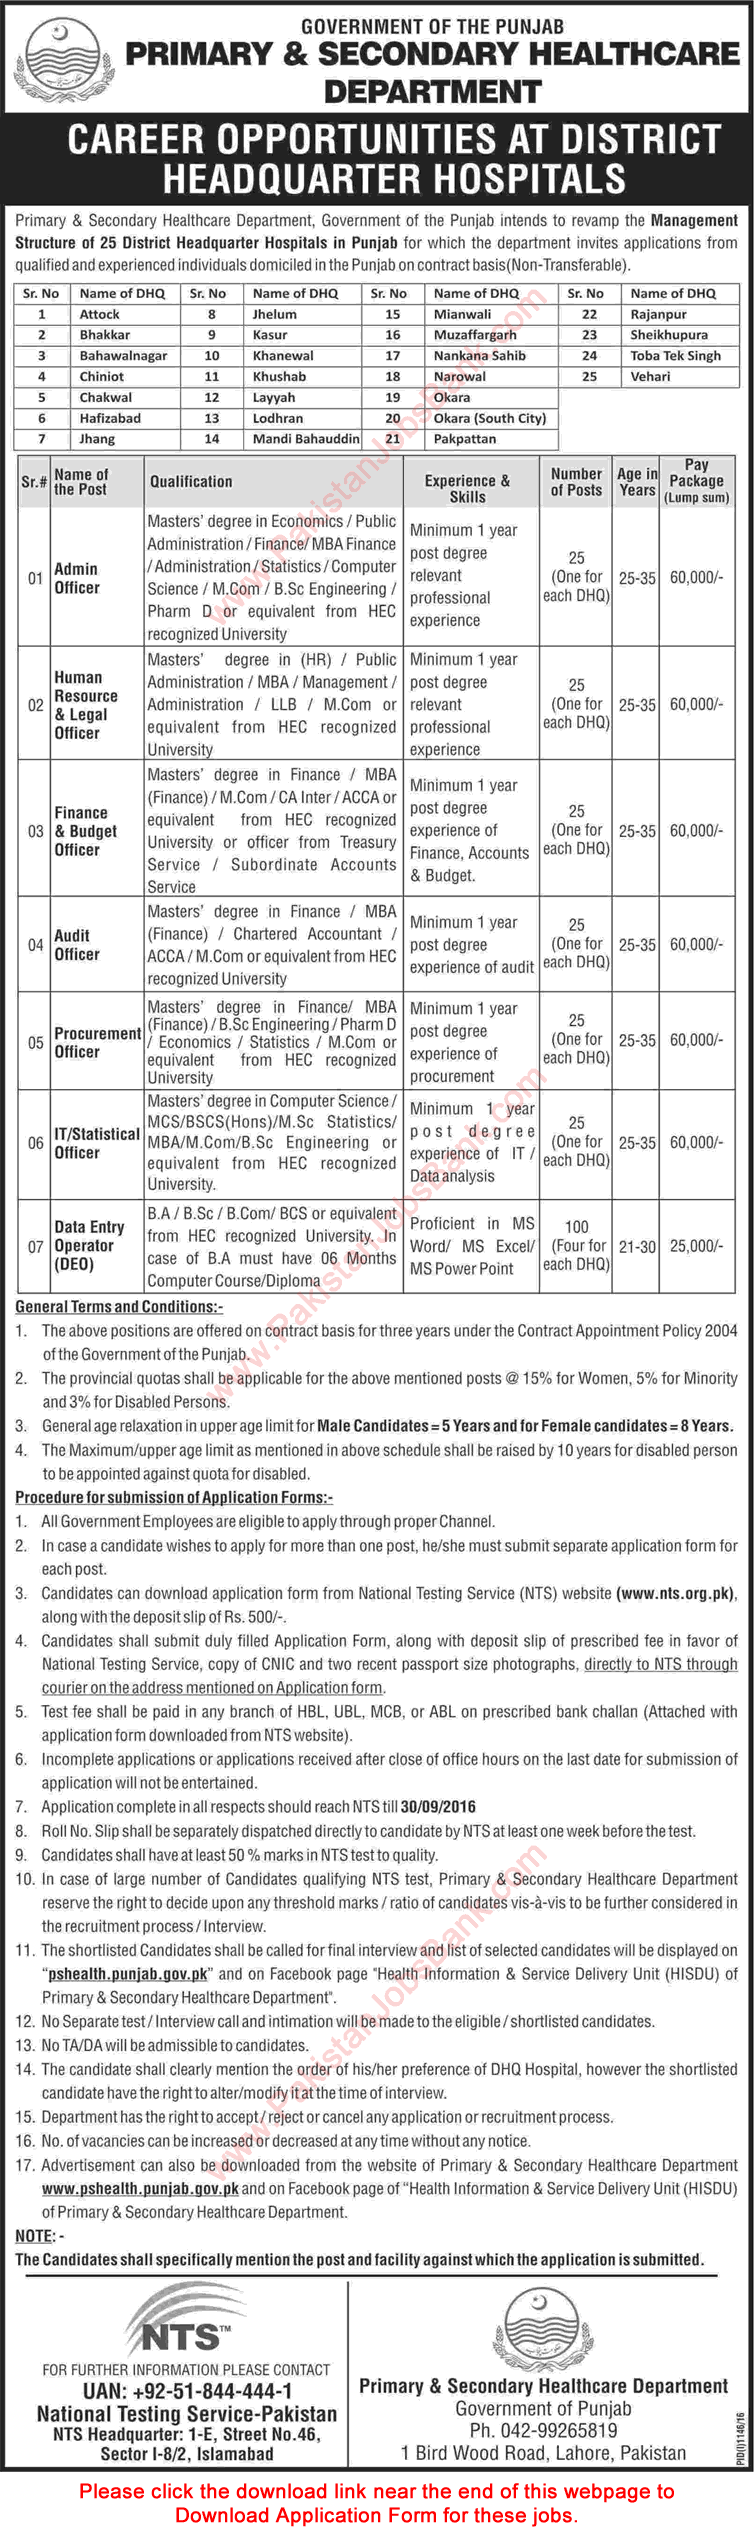 Primary and Secondary Health Department Punjab Jobs September 2016 at DHQ Hospitals NTS Application Form Latest